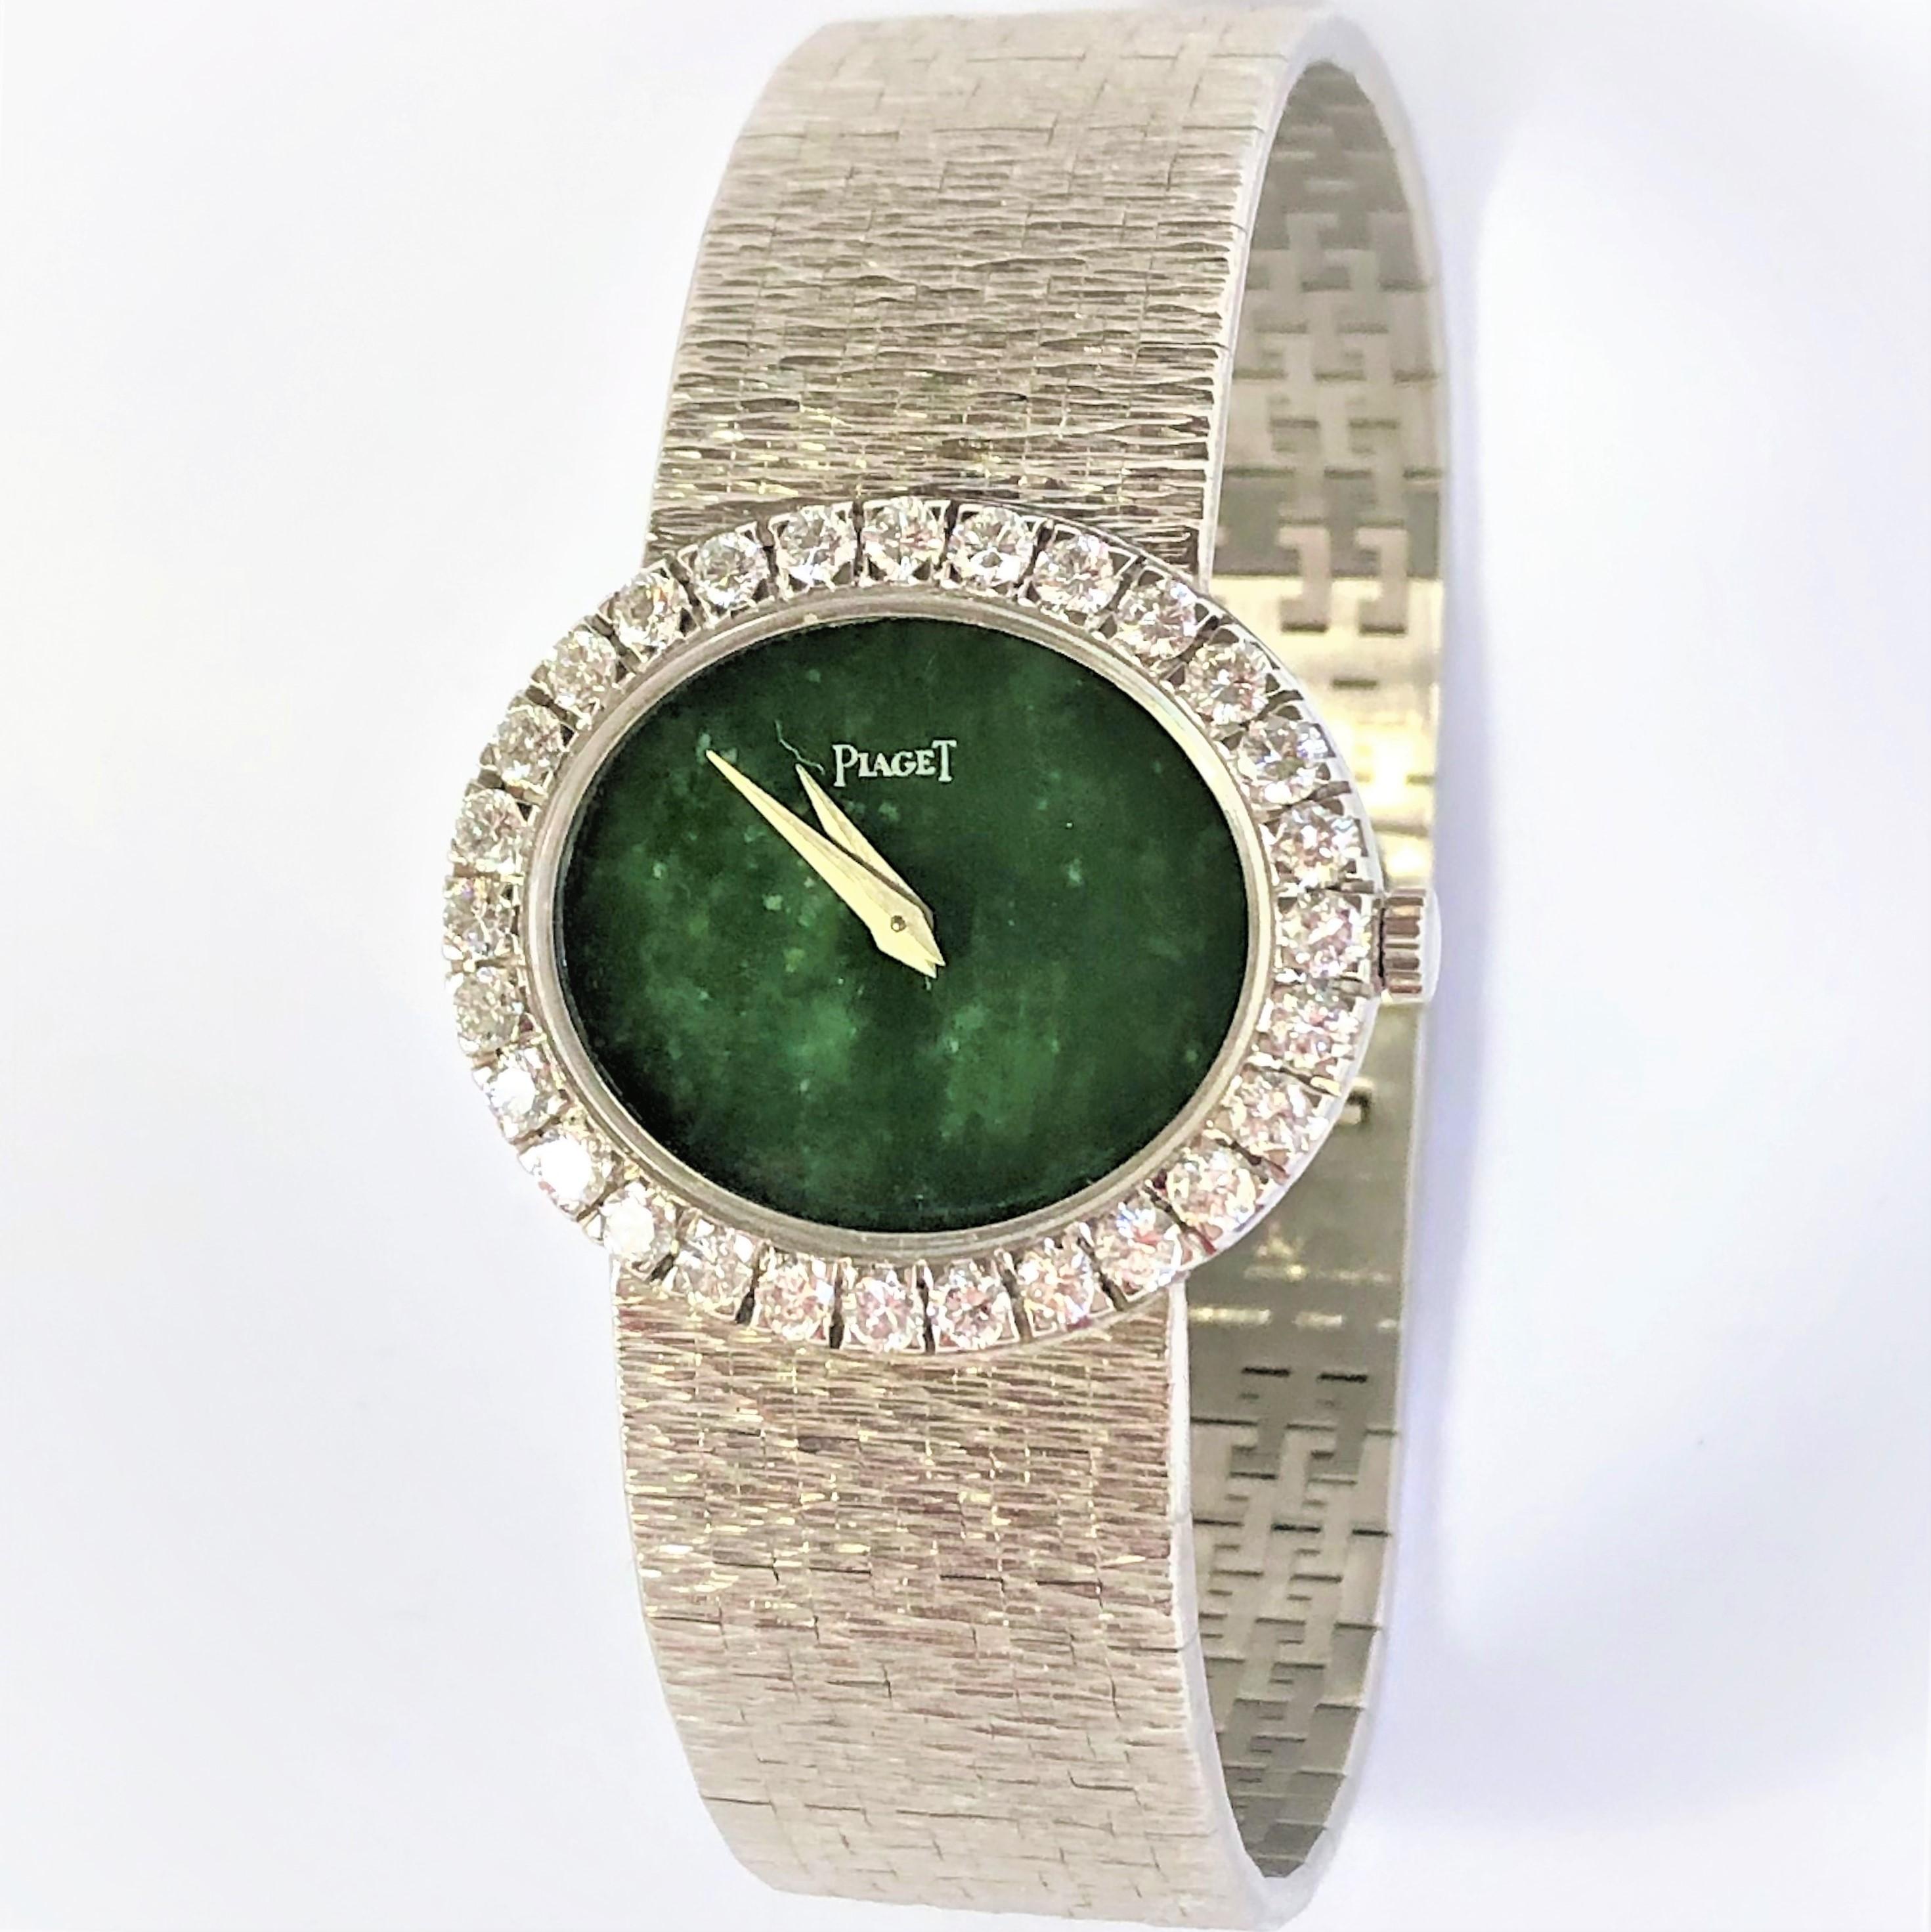 A ladies 18K white gold wristwatch by Piaget, set with 28 round brilliant cut diamonds weighing an approximate total of 2.00CT.  Measuring 27mm x 24mm, this lovely horizontal watch features a jade dial. Manual wind watch measuring  just under 6 3/4